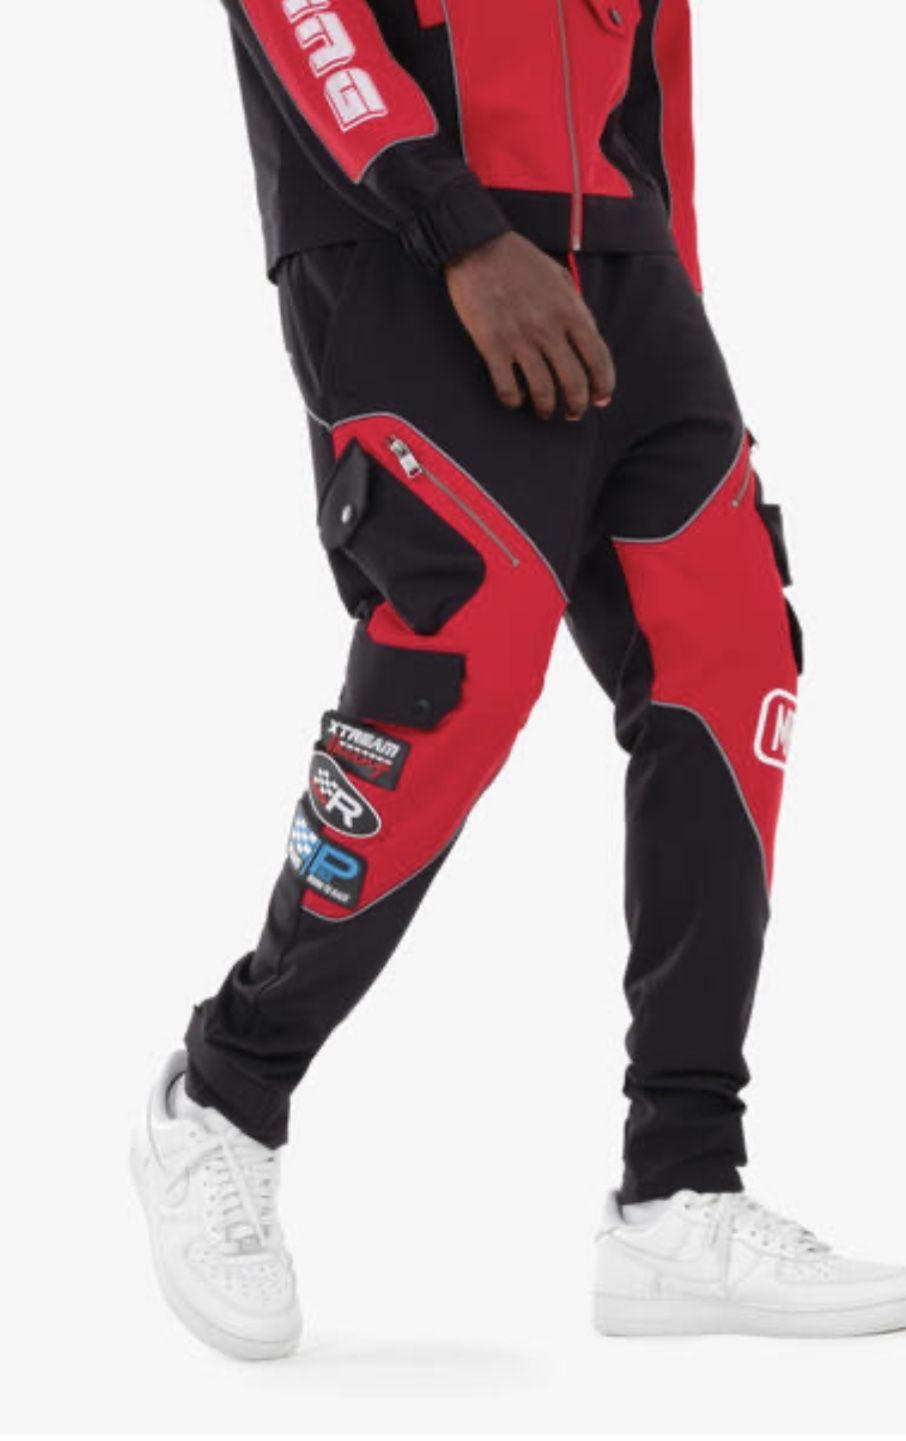 Men’s Red And Black Jogger Pants Sizes Small To XXL 